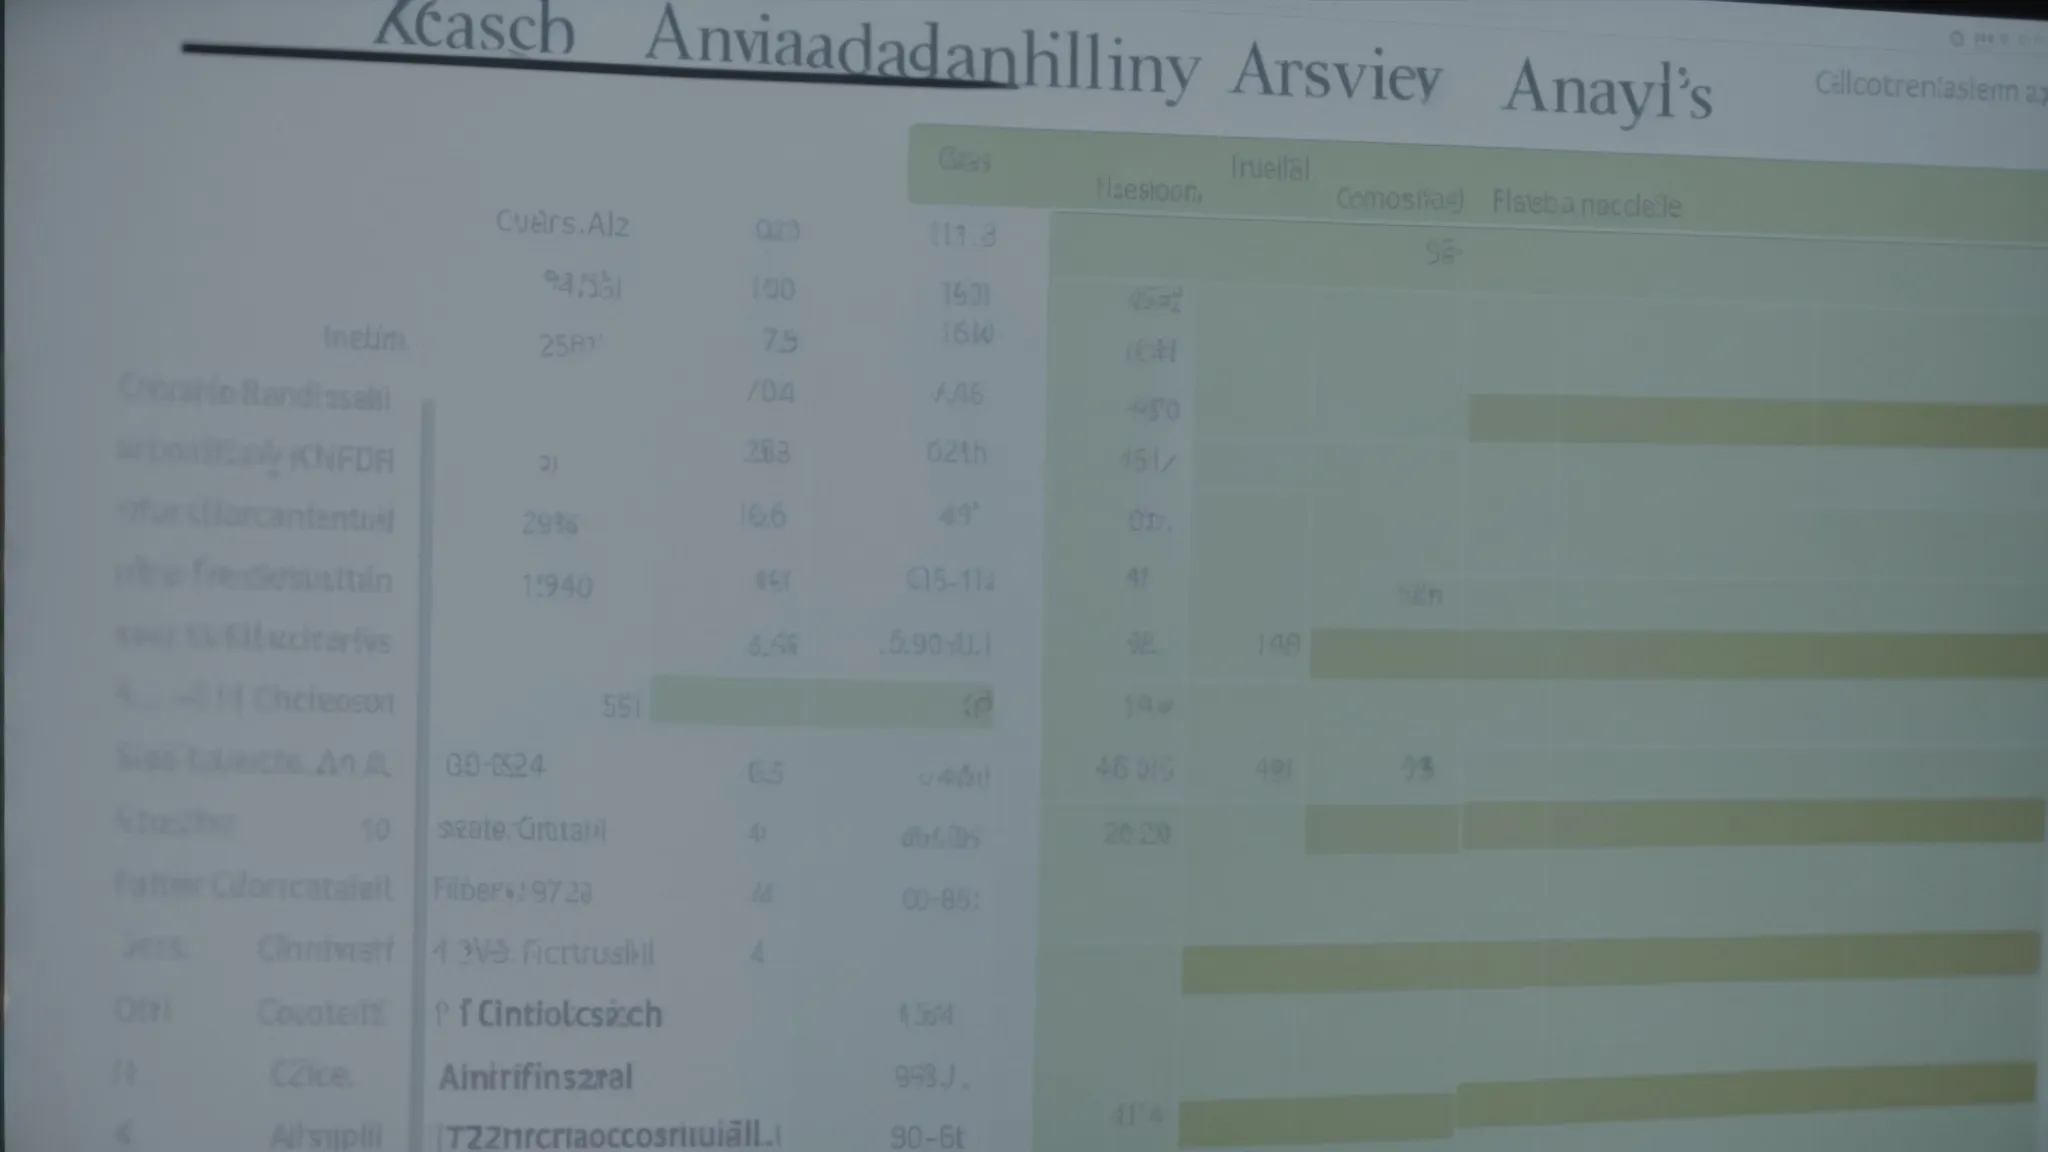 a close-up of a computer screen displaying the interface of the flesch-kincaid readability analysis software.